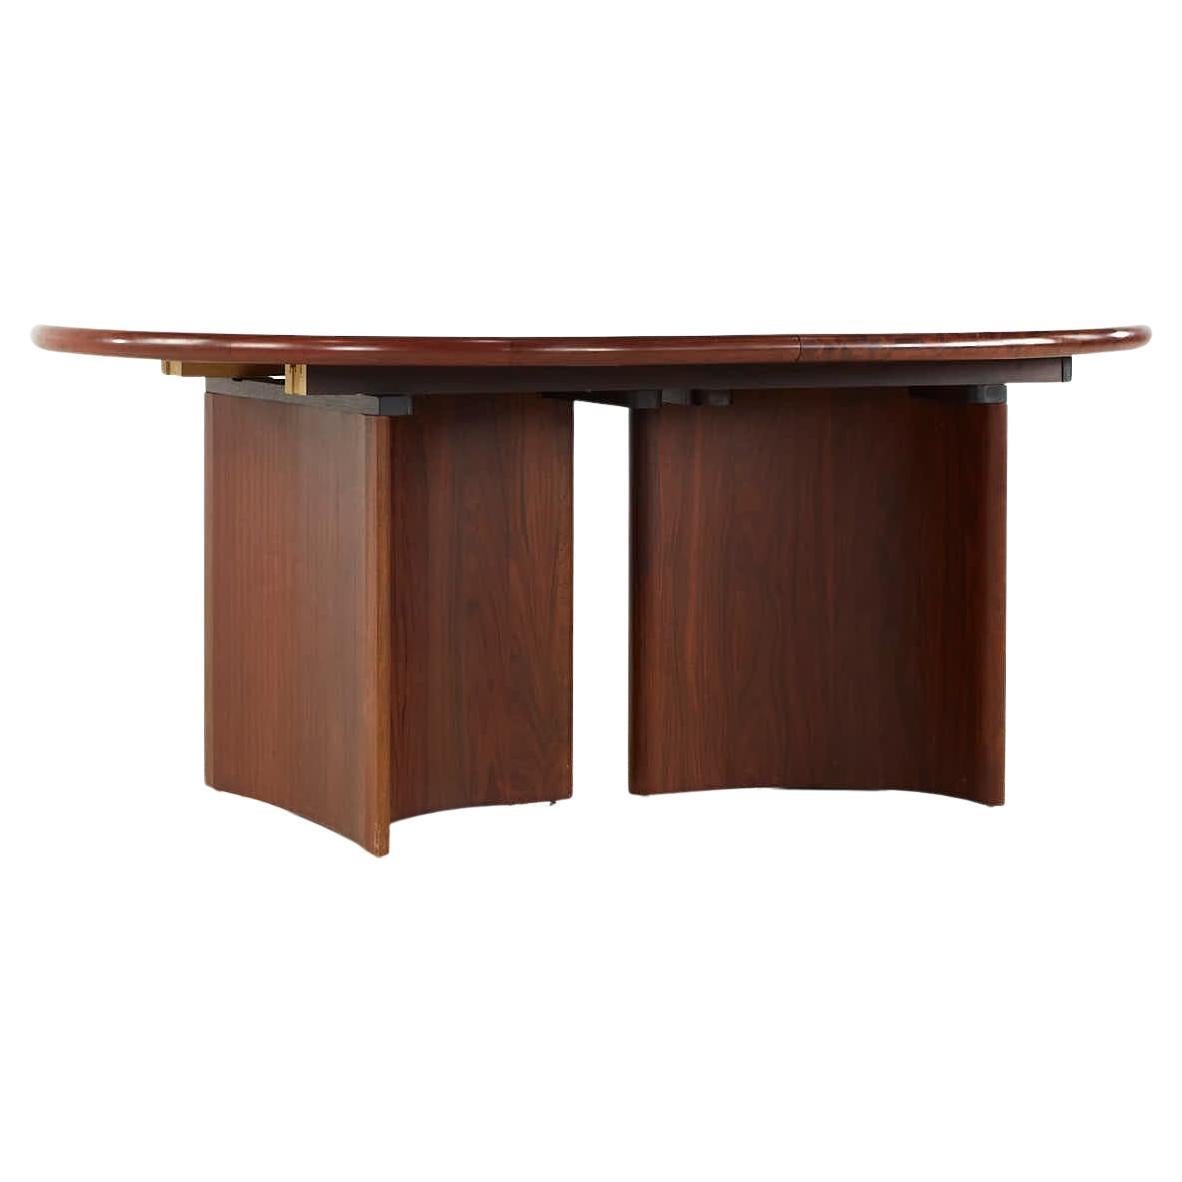 Skovmand and Andersen Mid Century Rosewood Expanding Dining Table with 2 Leaves